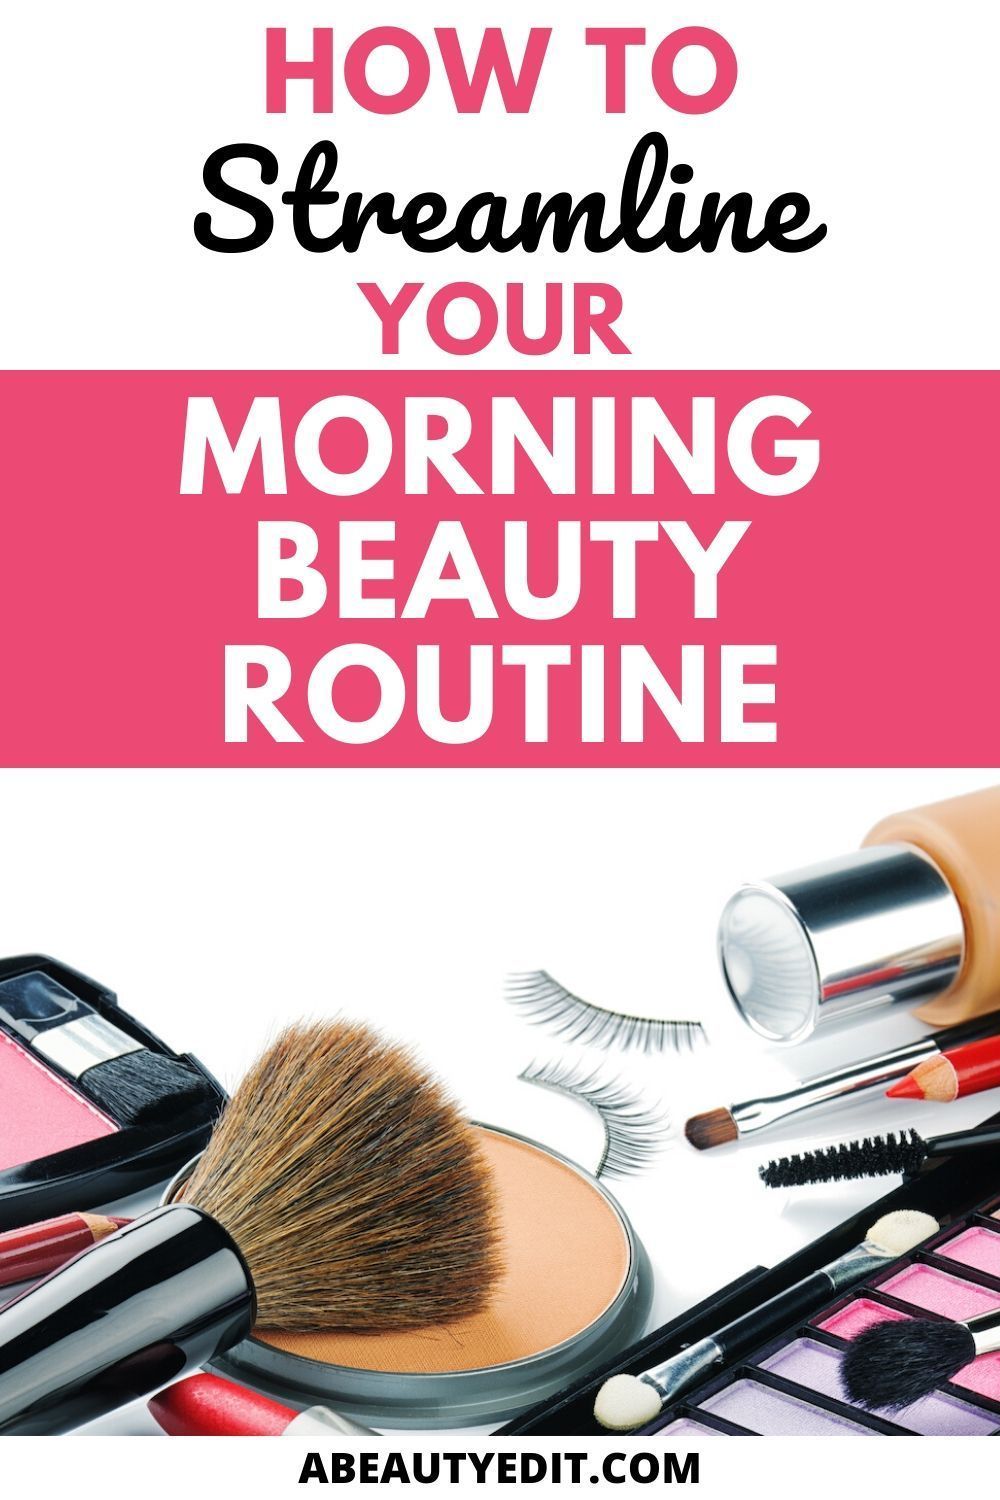 How to Streamline Your Morning Beauty Routine - How to Streamline Your Morning Beauty Routine -   18 morning beauty Tips ideas